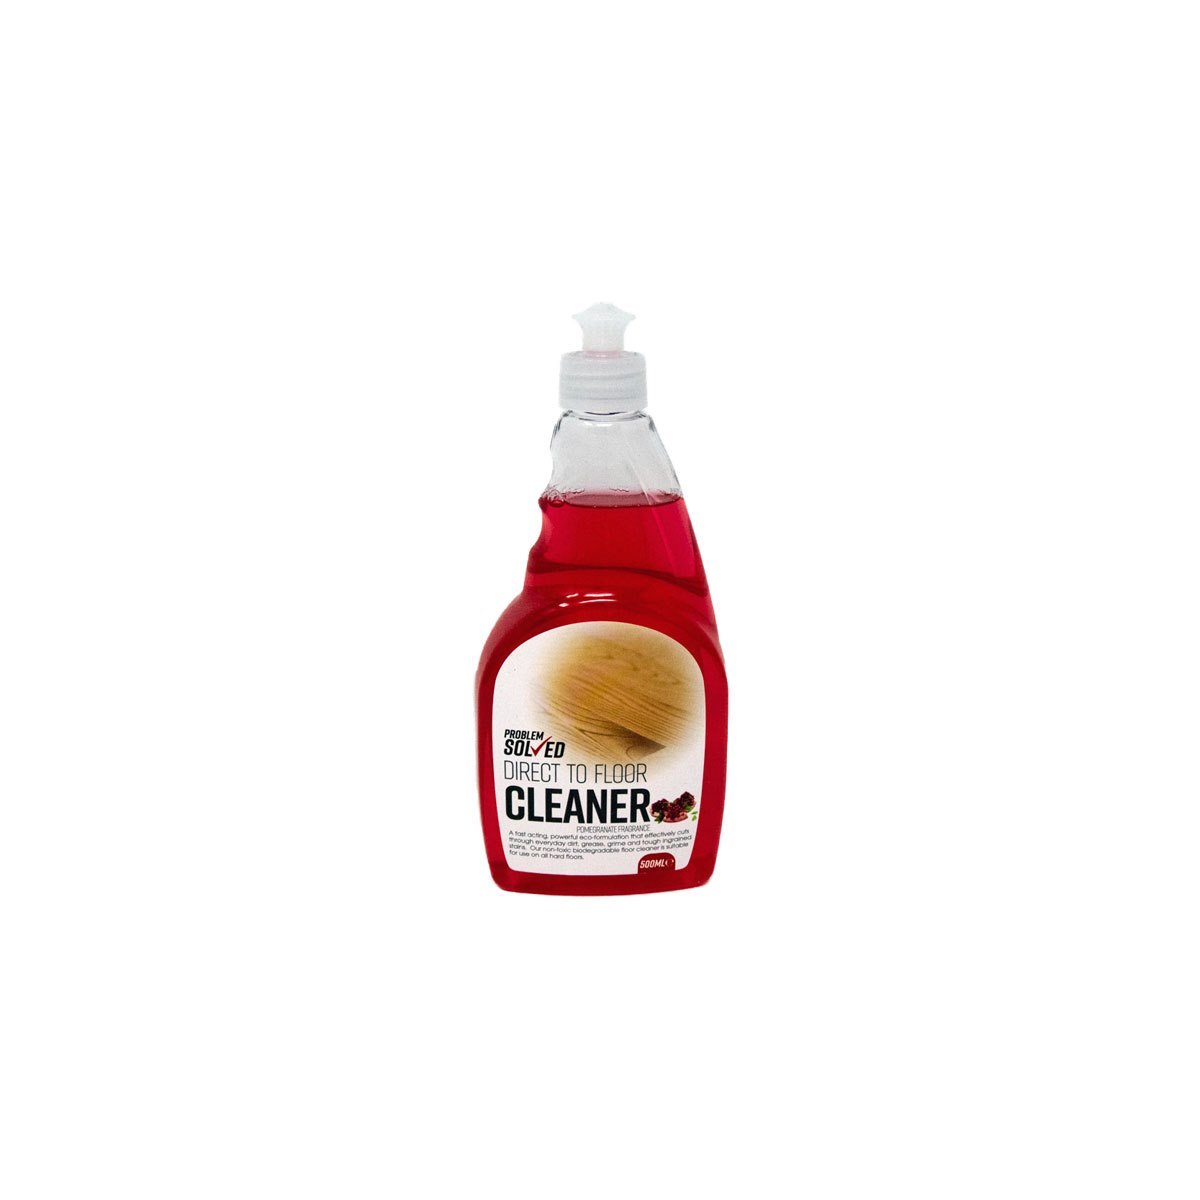 Problem Solved Direct To Floor Cleaner Pomegranate 500ml